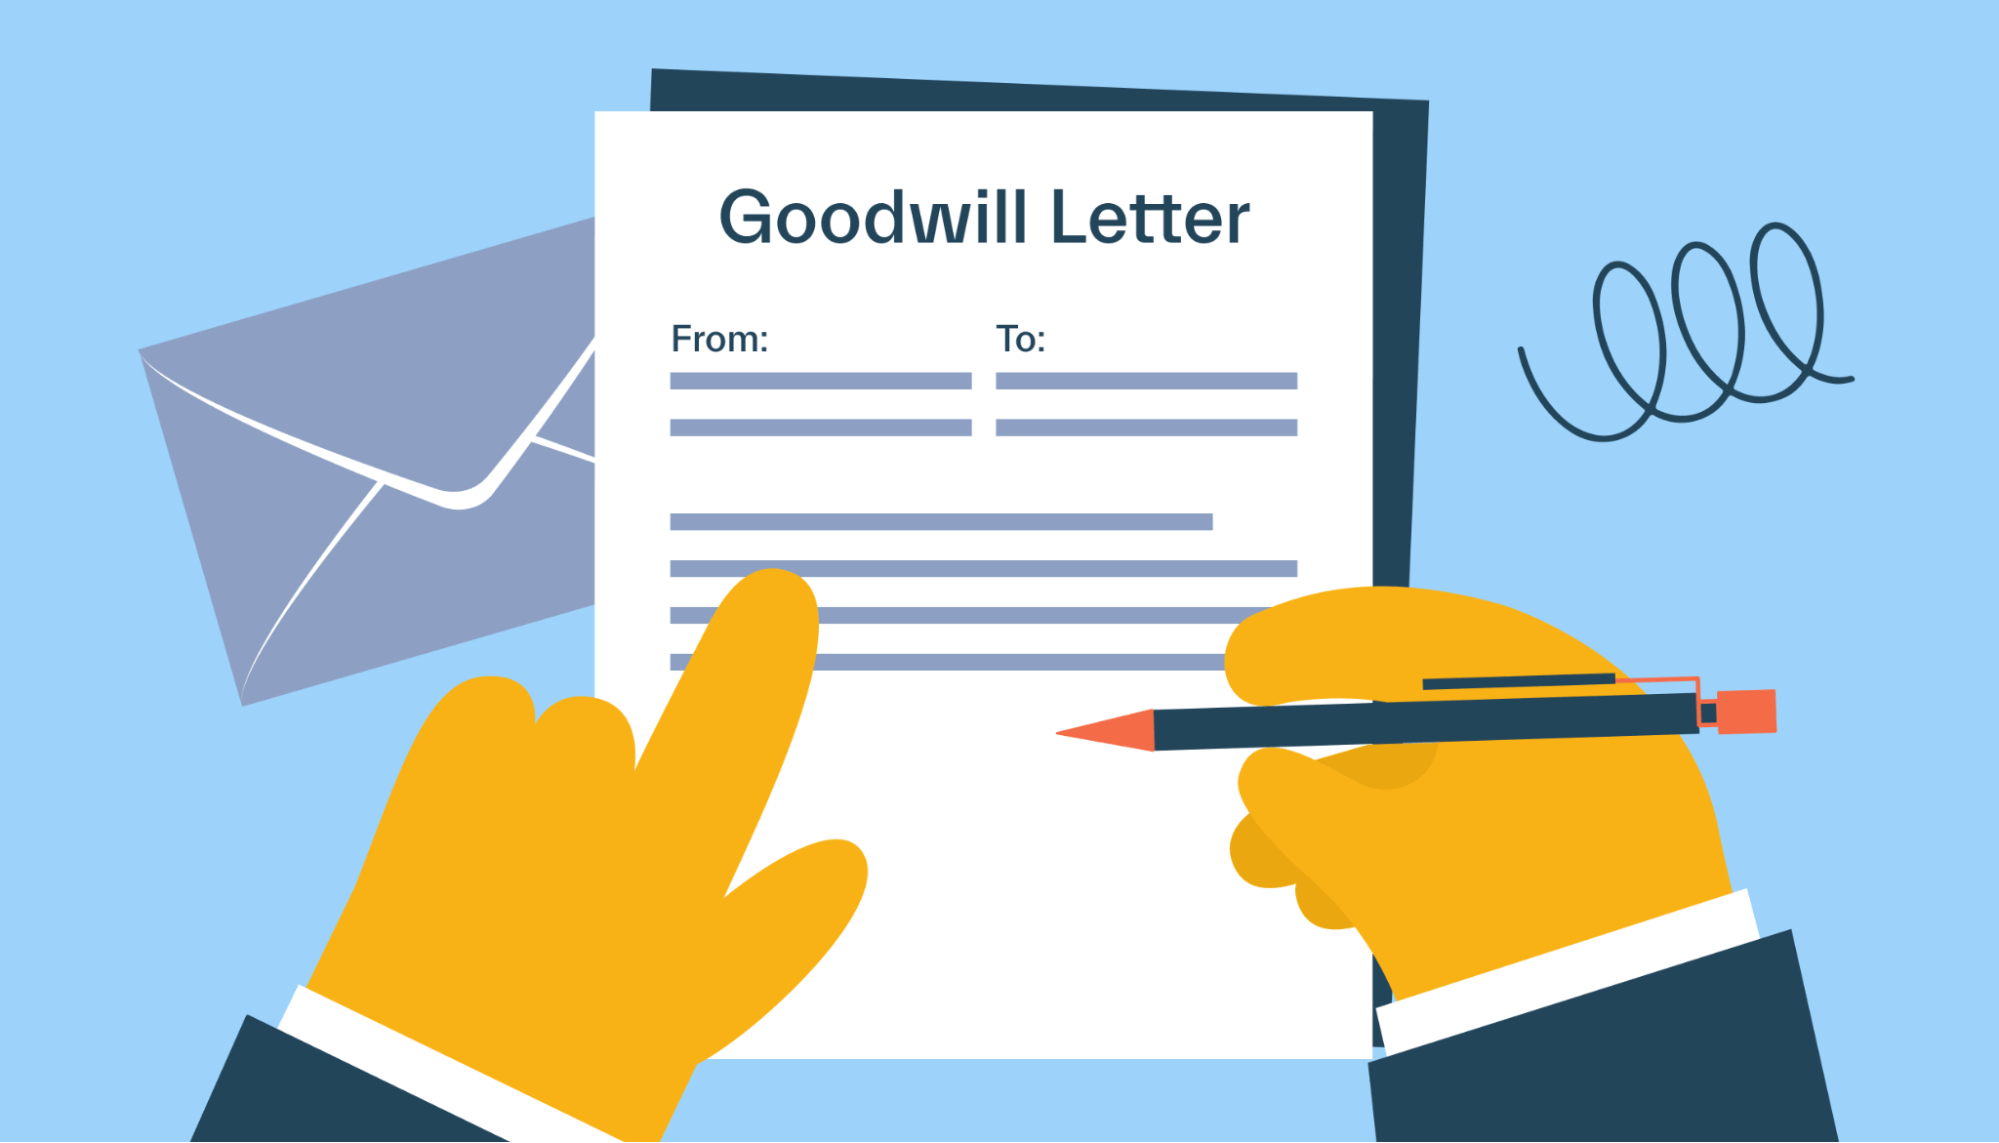 What is a goodwill letter?